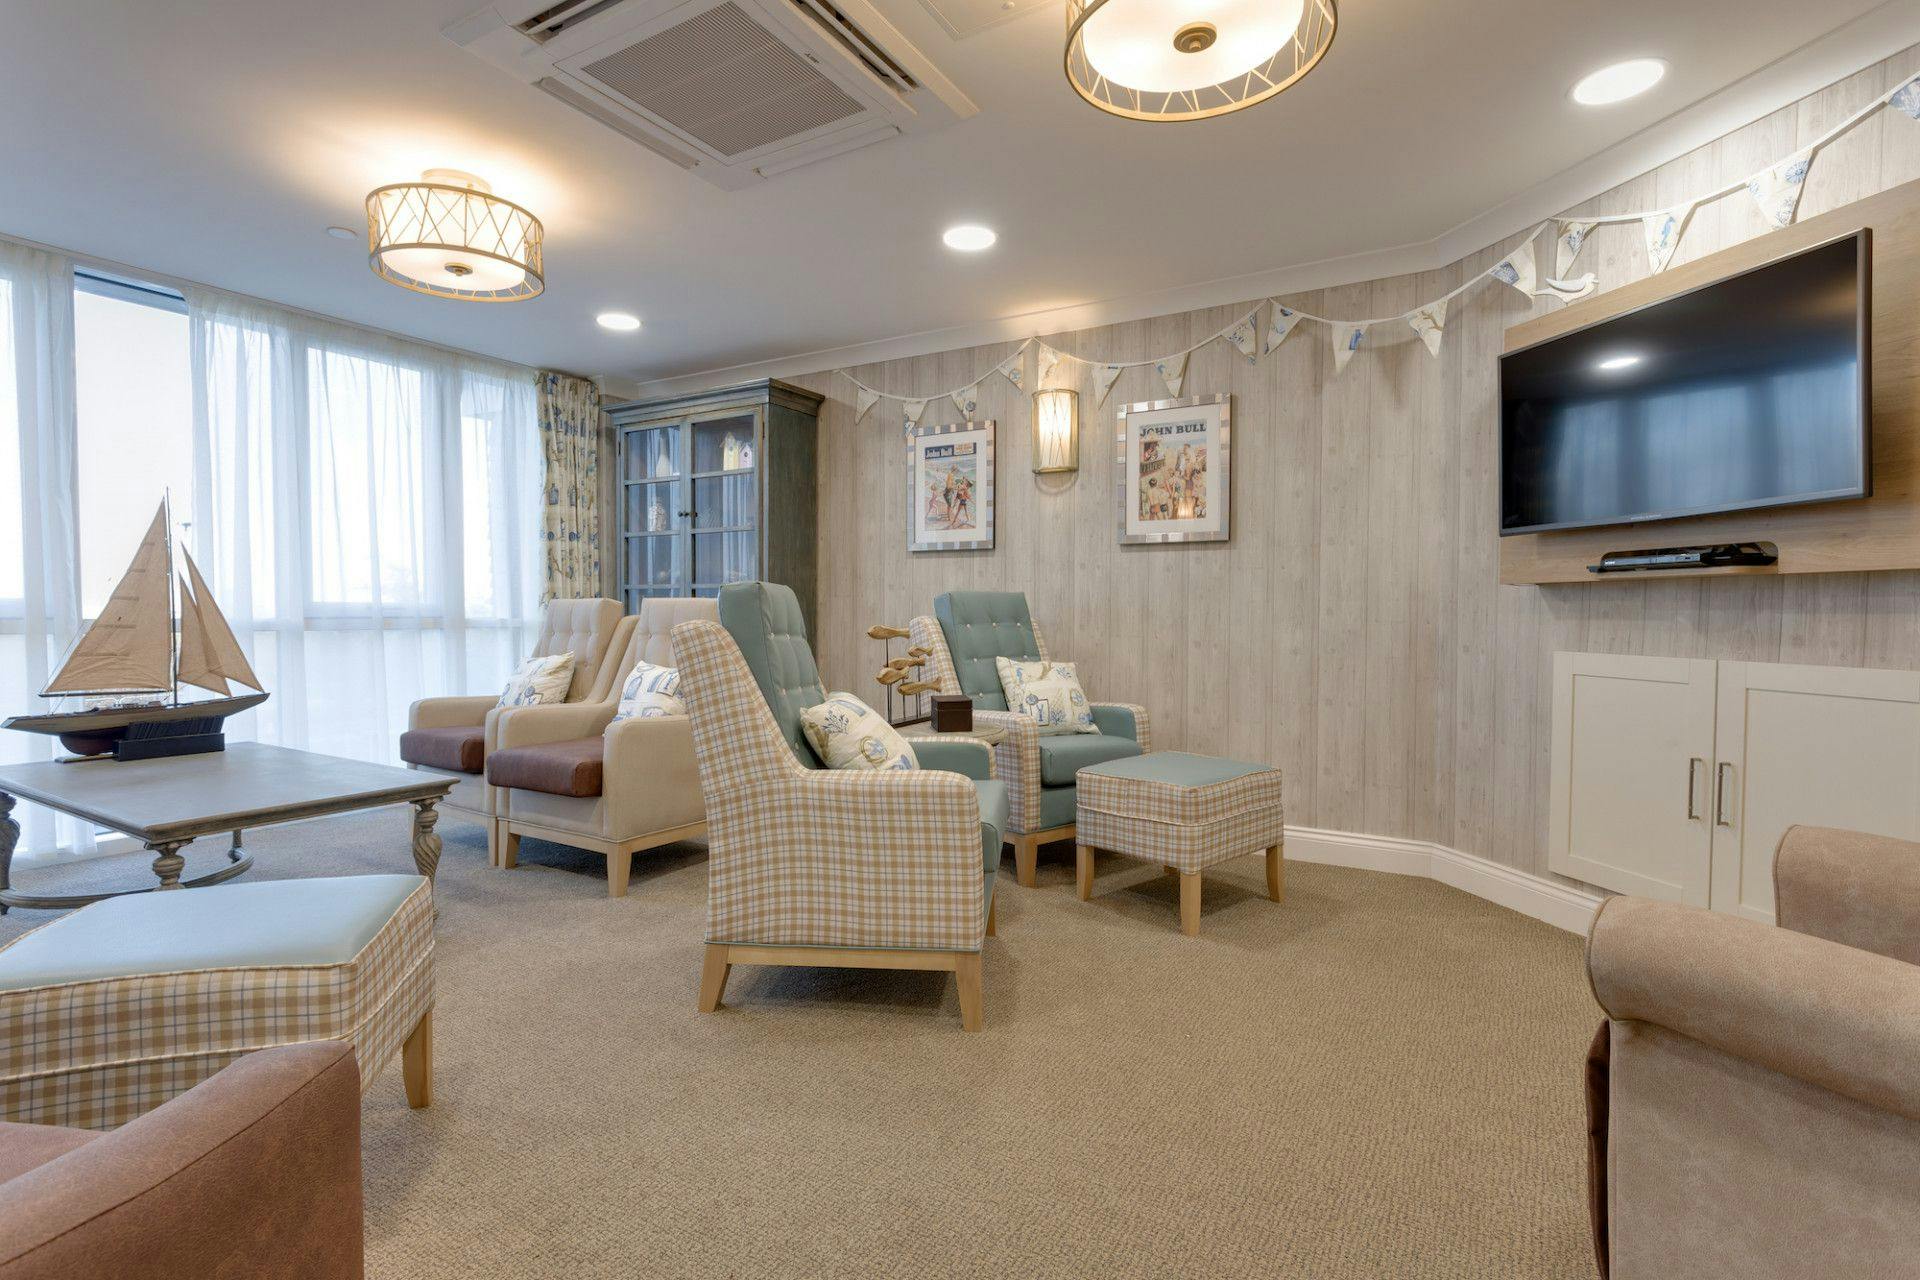 Care UK - Harrier Lodge care home 9